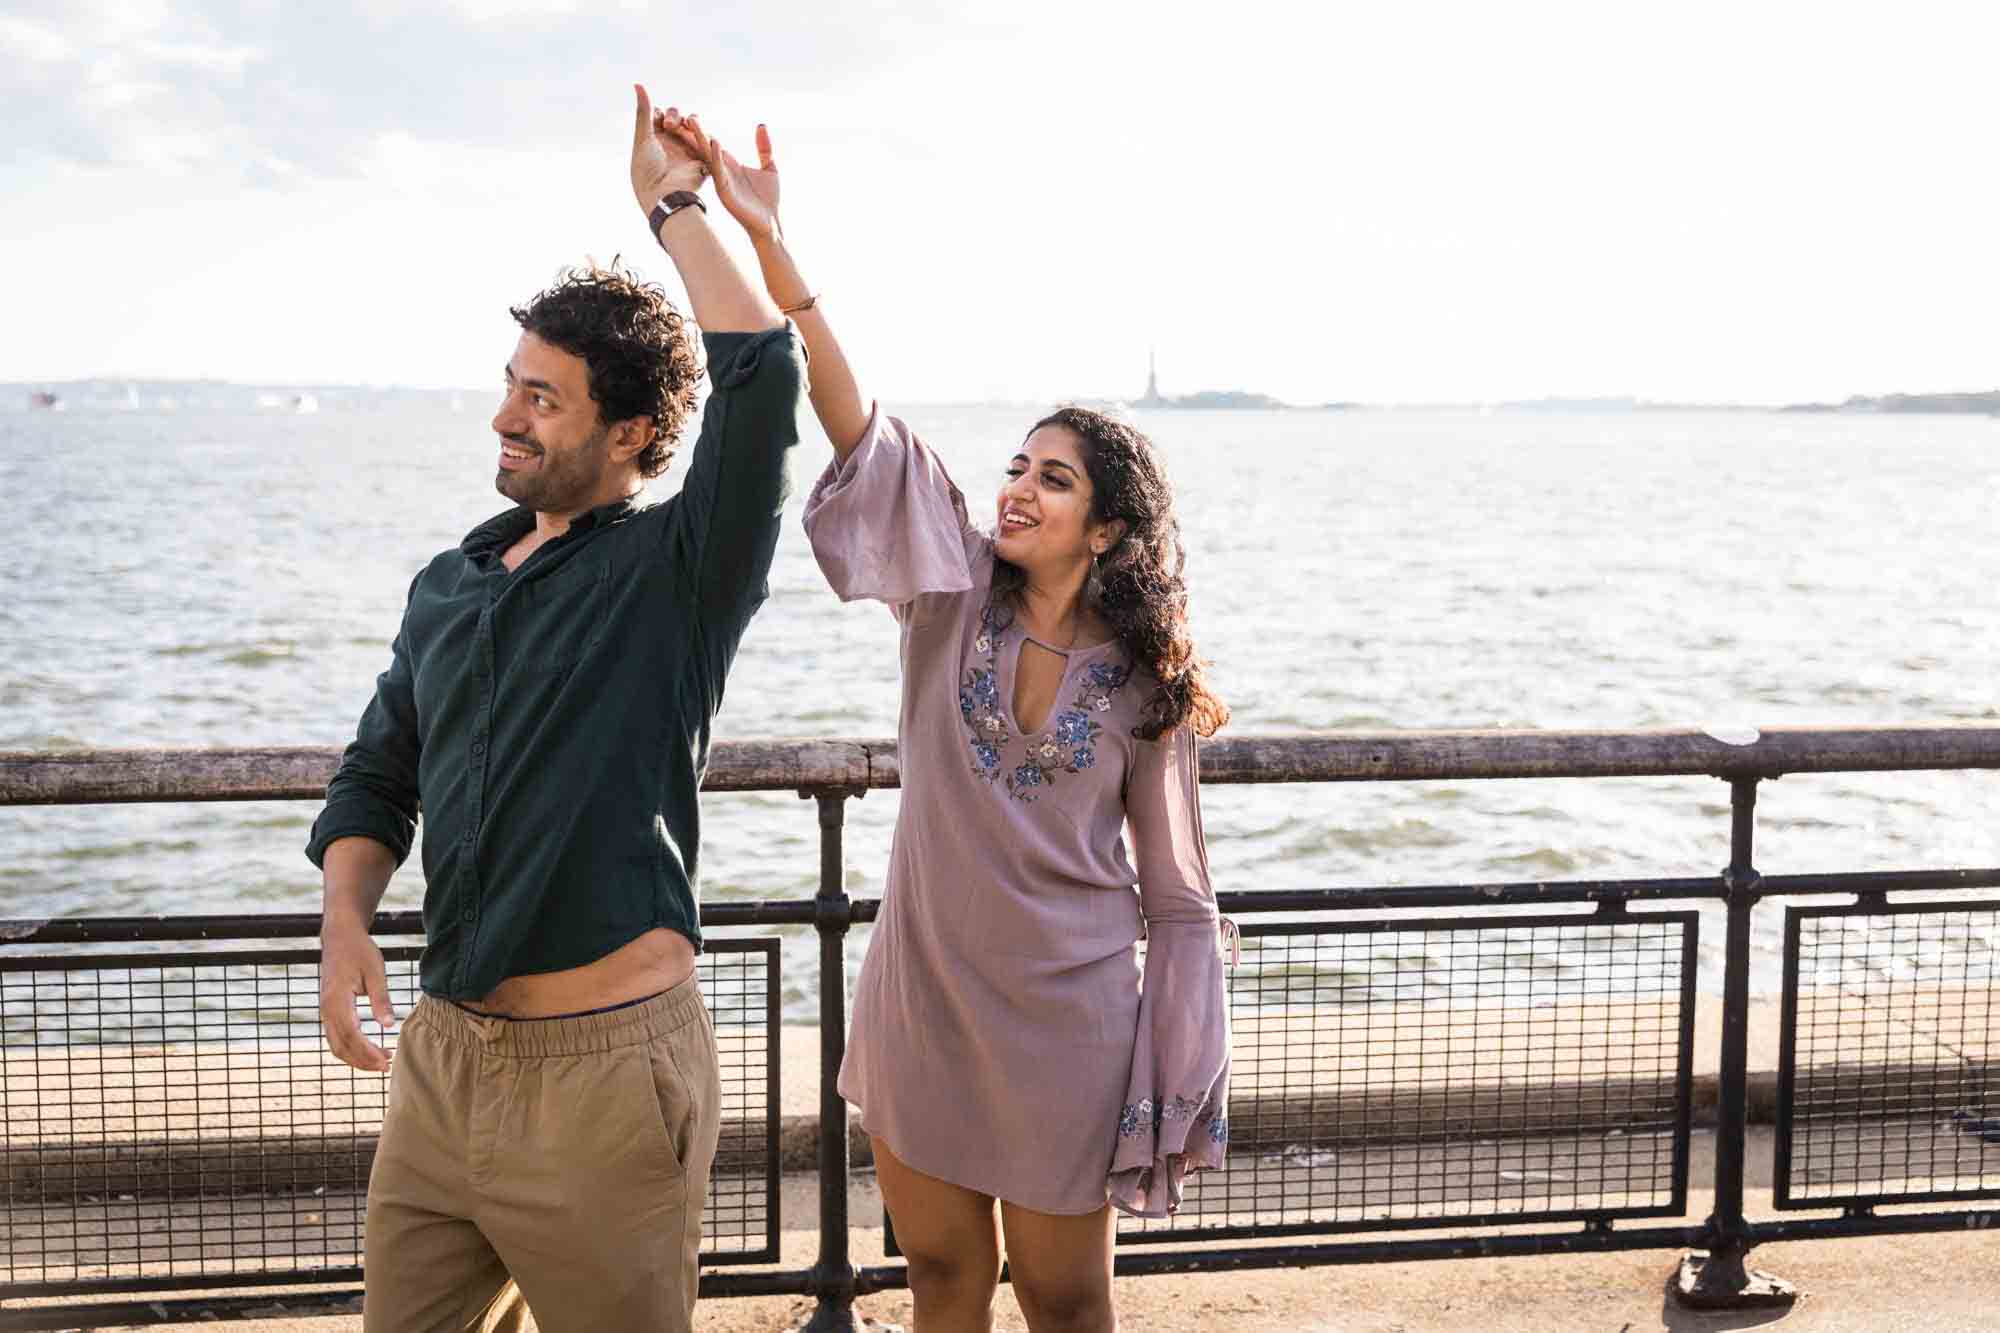 Battery Park engagement photos of couple dancing in front of NYC waterfront with hands raised